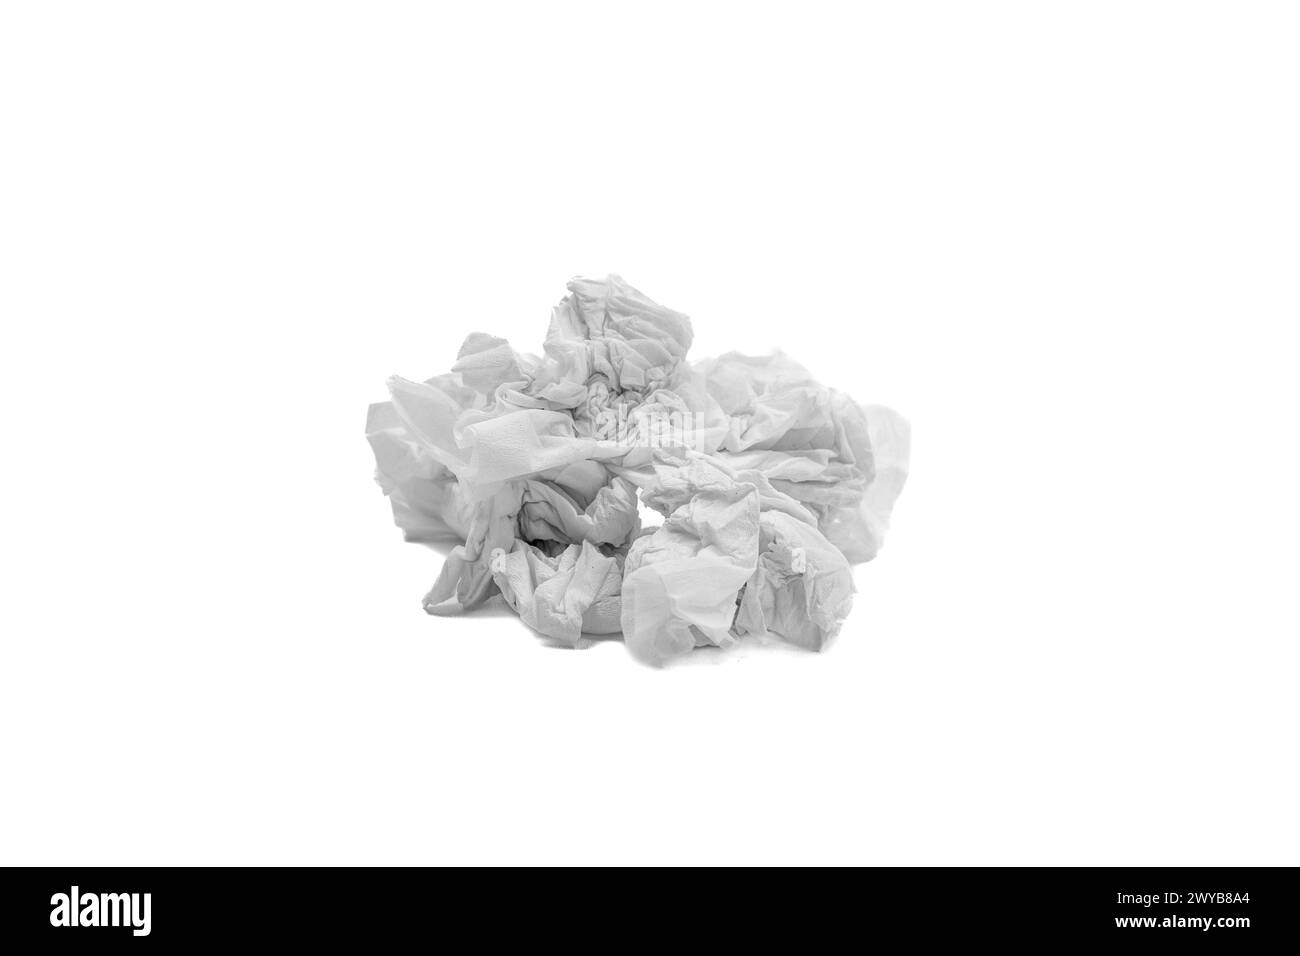 Pile of crumpled tissue paper. Used screwed paper tissue isolated on white background. Personal hygiene Stock Photo